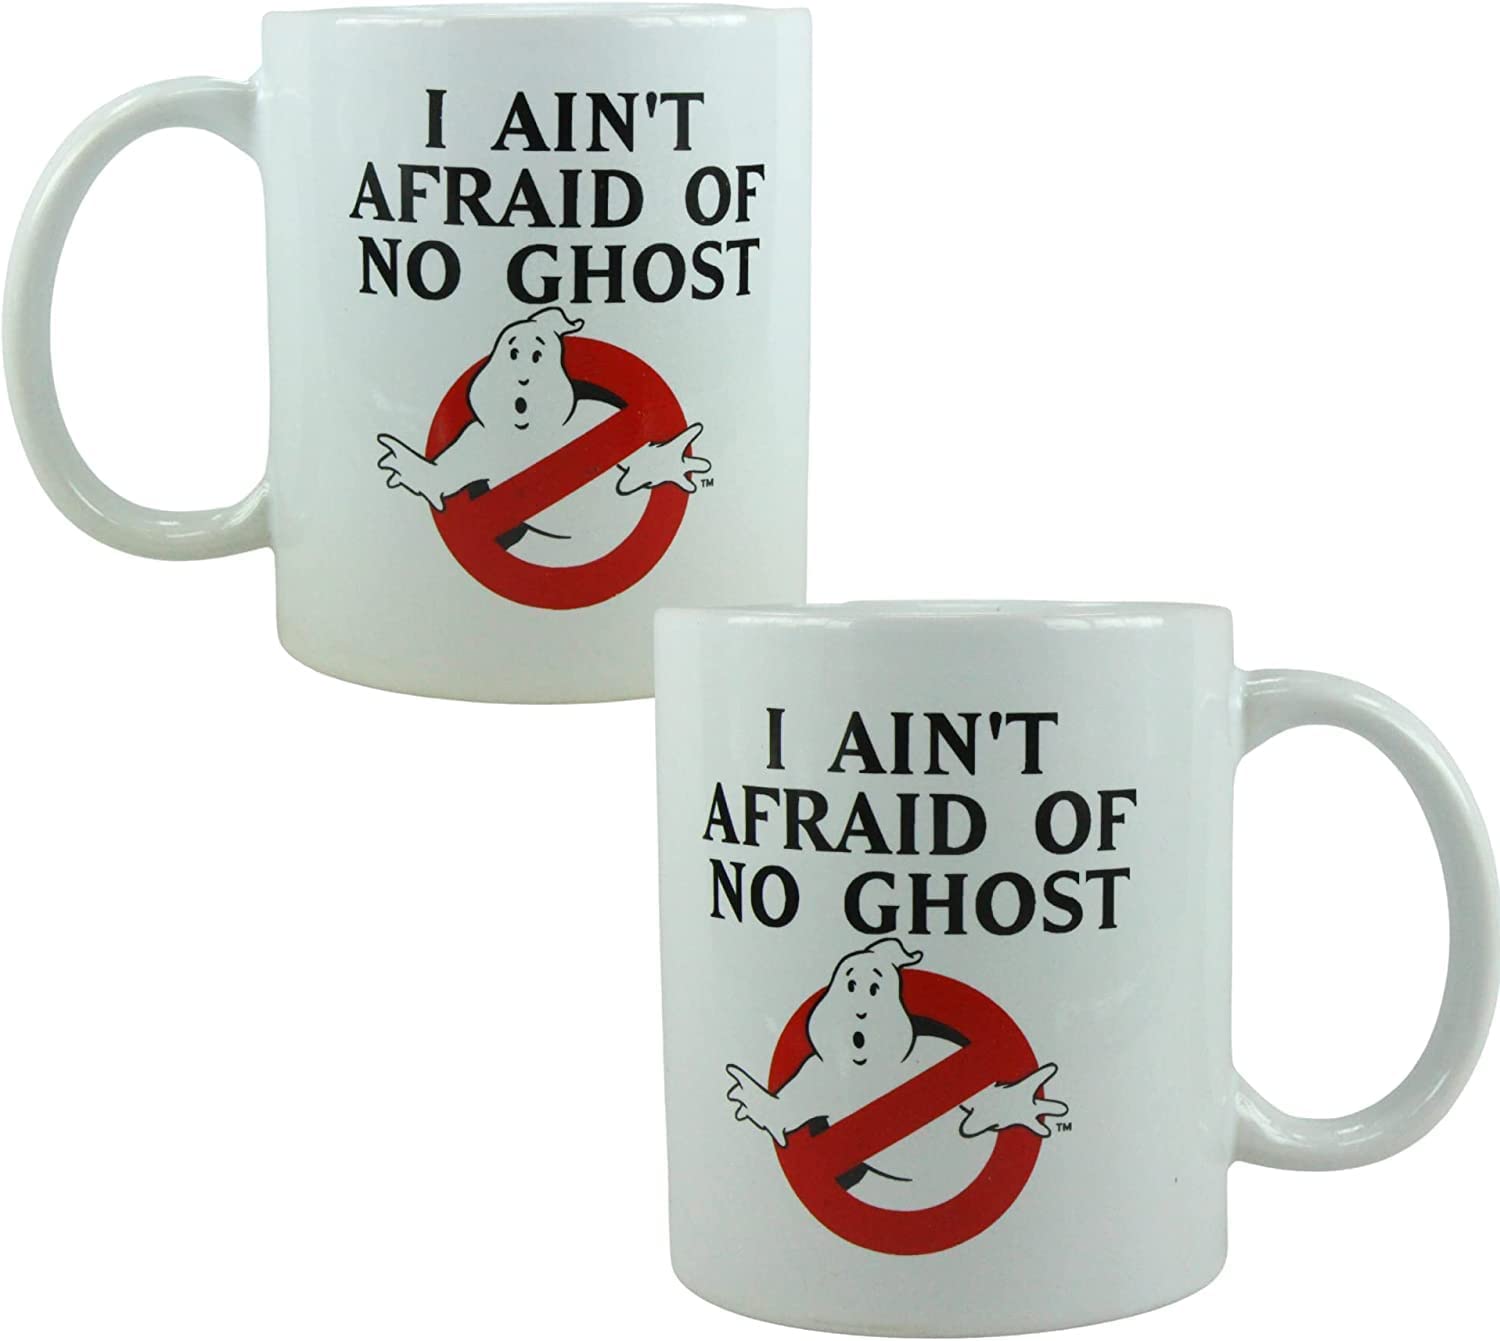 Ghostbuster Metal No Ghost Logo Can Cooler & 330ml "I Ain't Afraid of No Ghost" Mug - Twin Pack - Toptoys2u